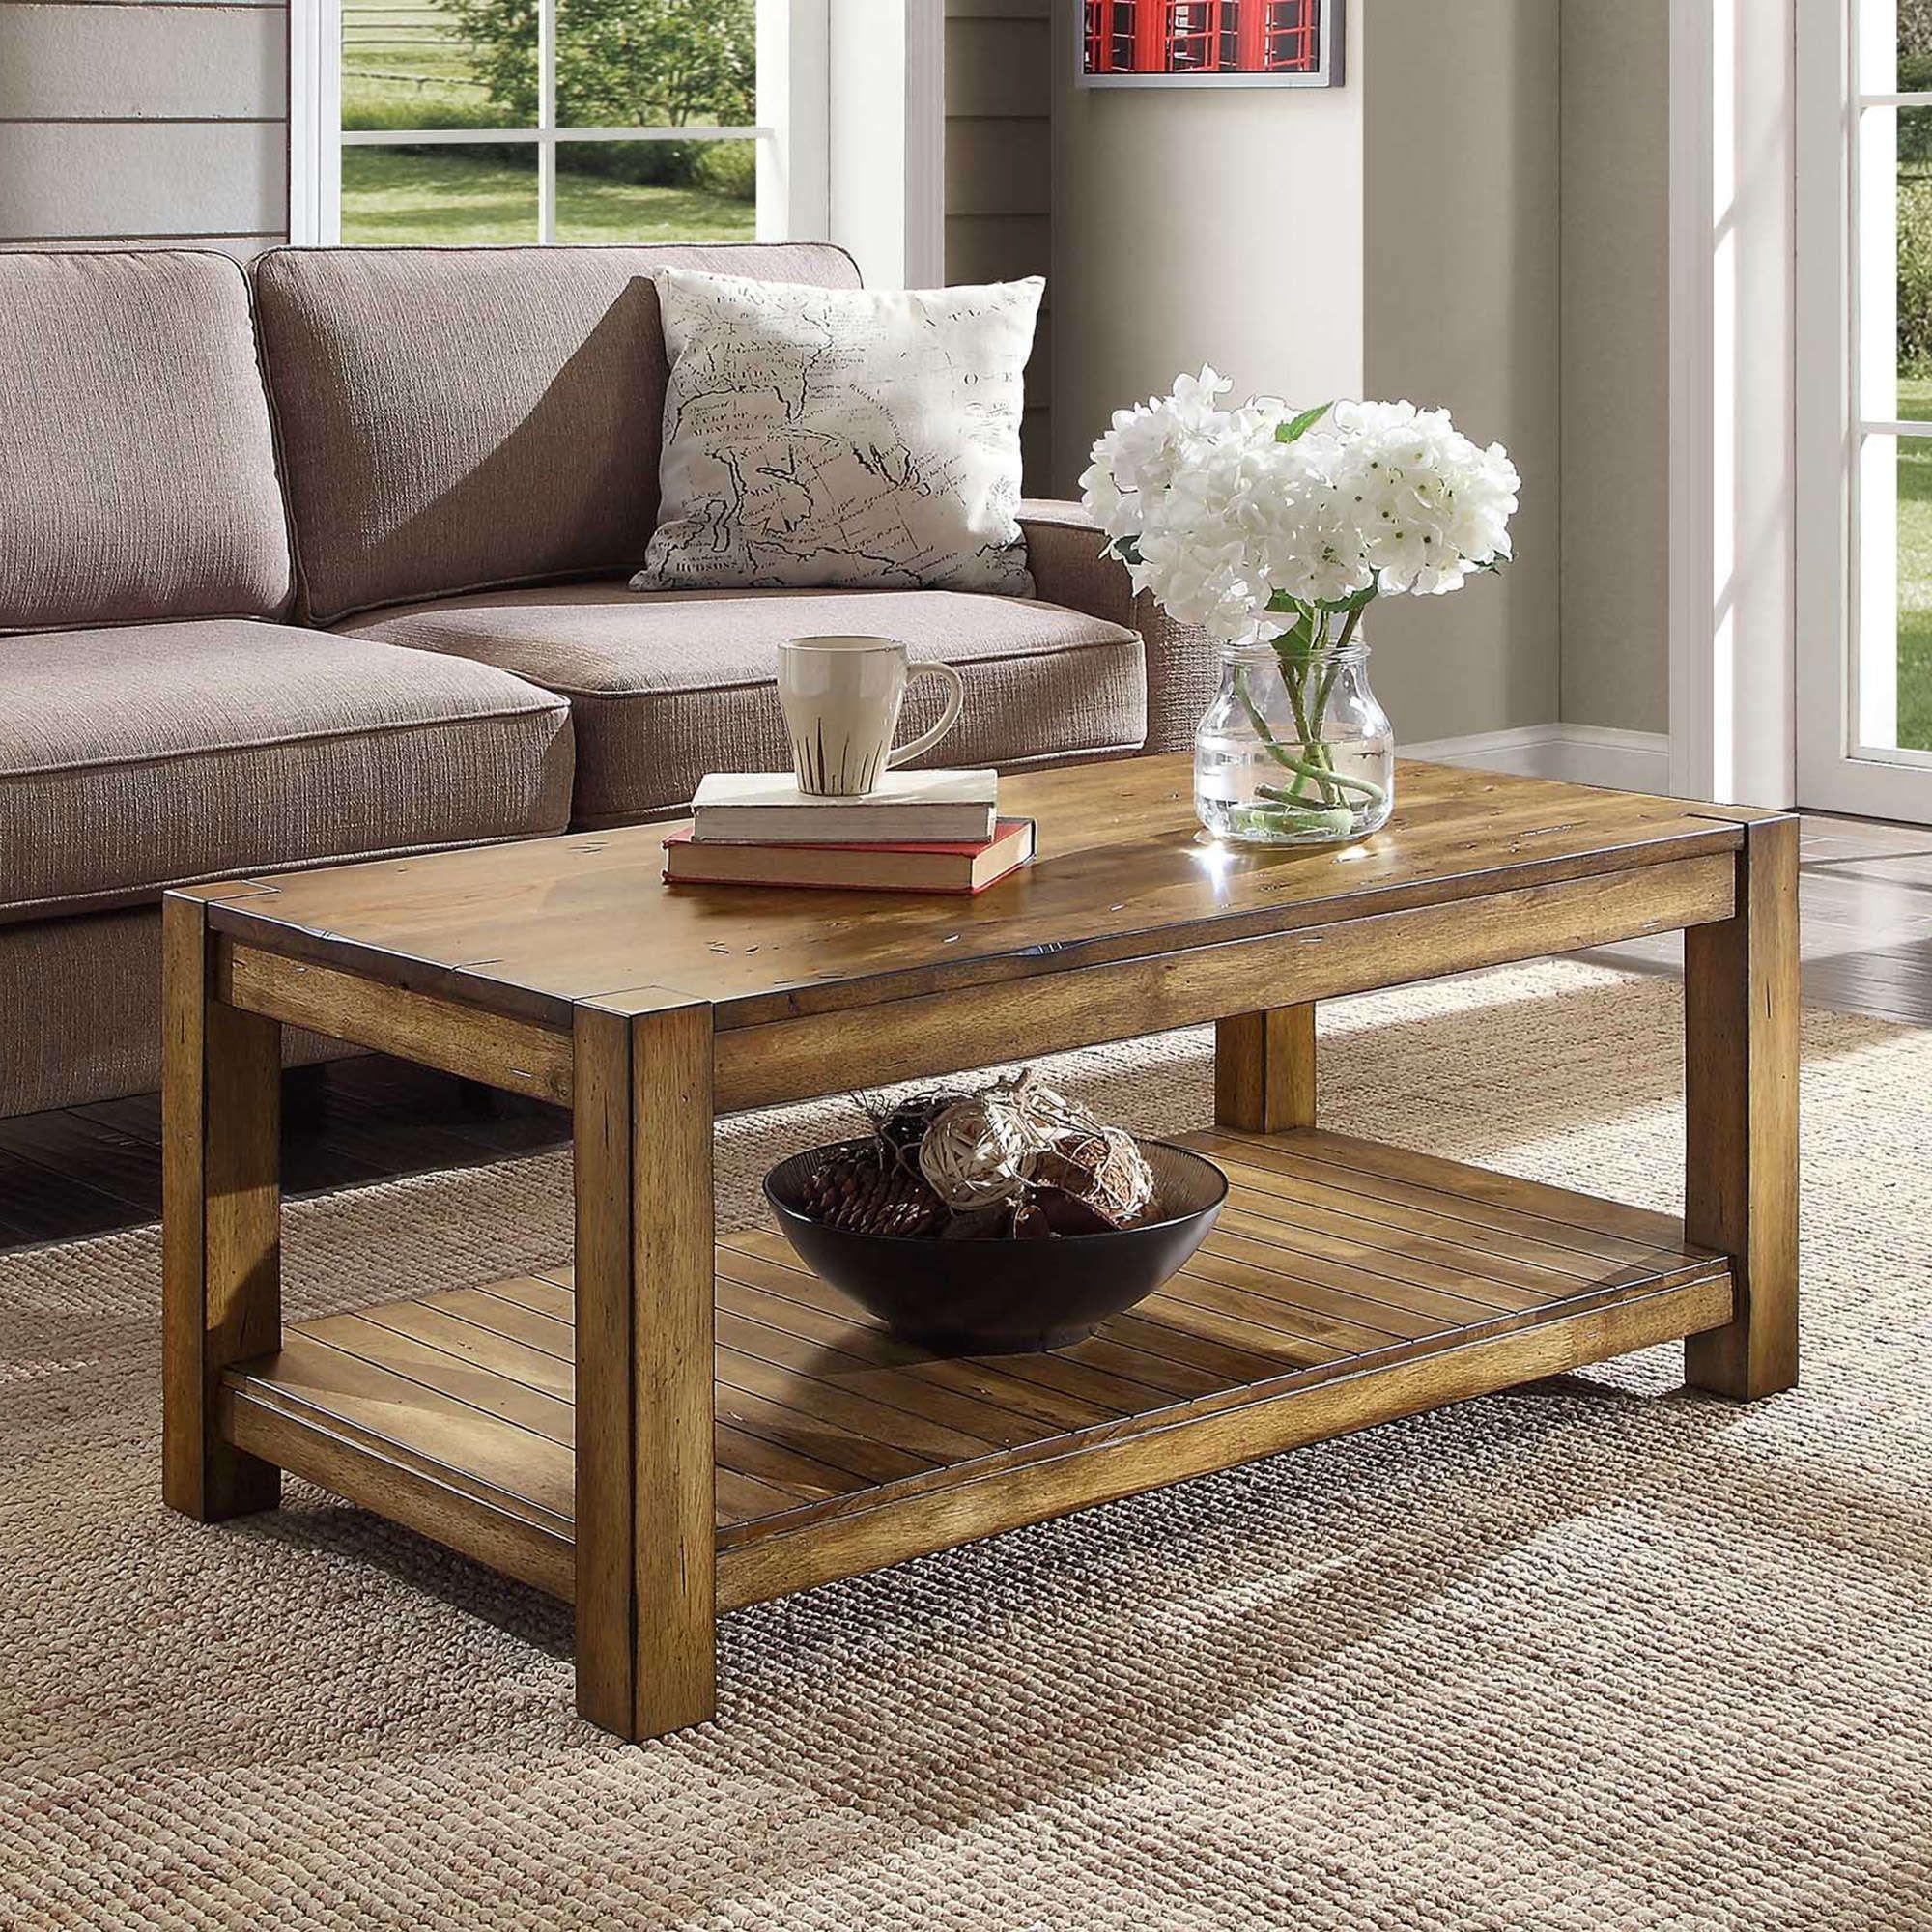 Better Homes & Gardens Bryant Solid Wood Coffee Table, Rustic Maple Intended For Rustic Coffee Tables (View 12 of 20)